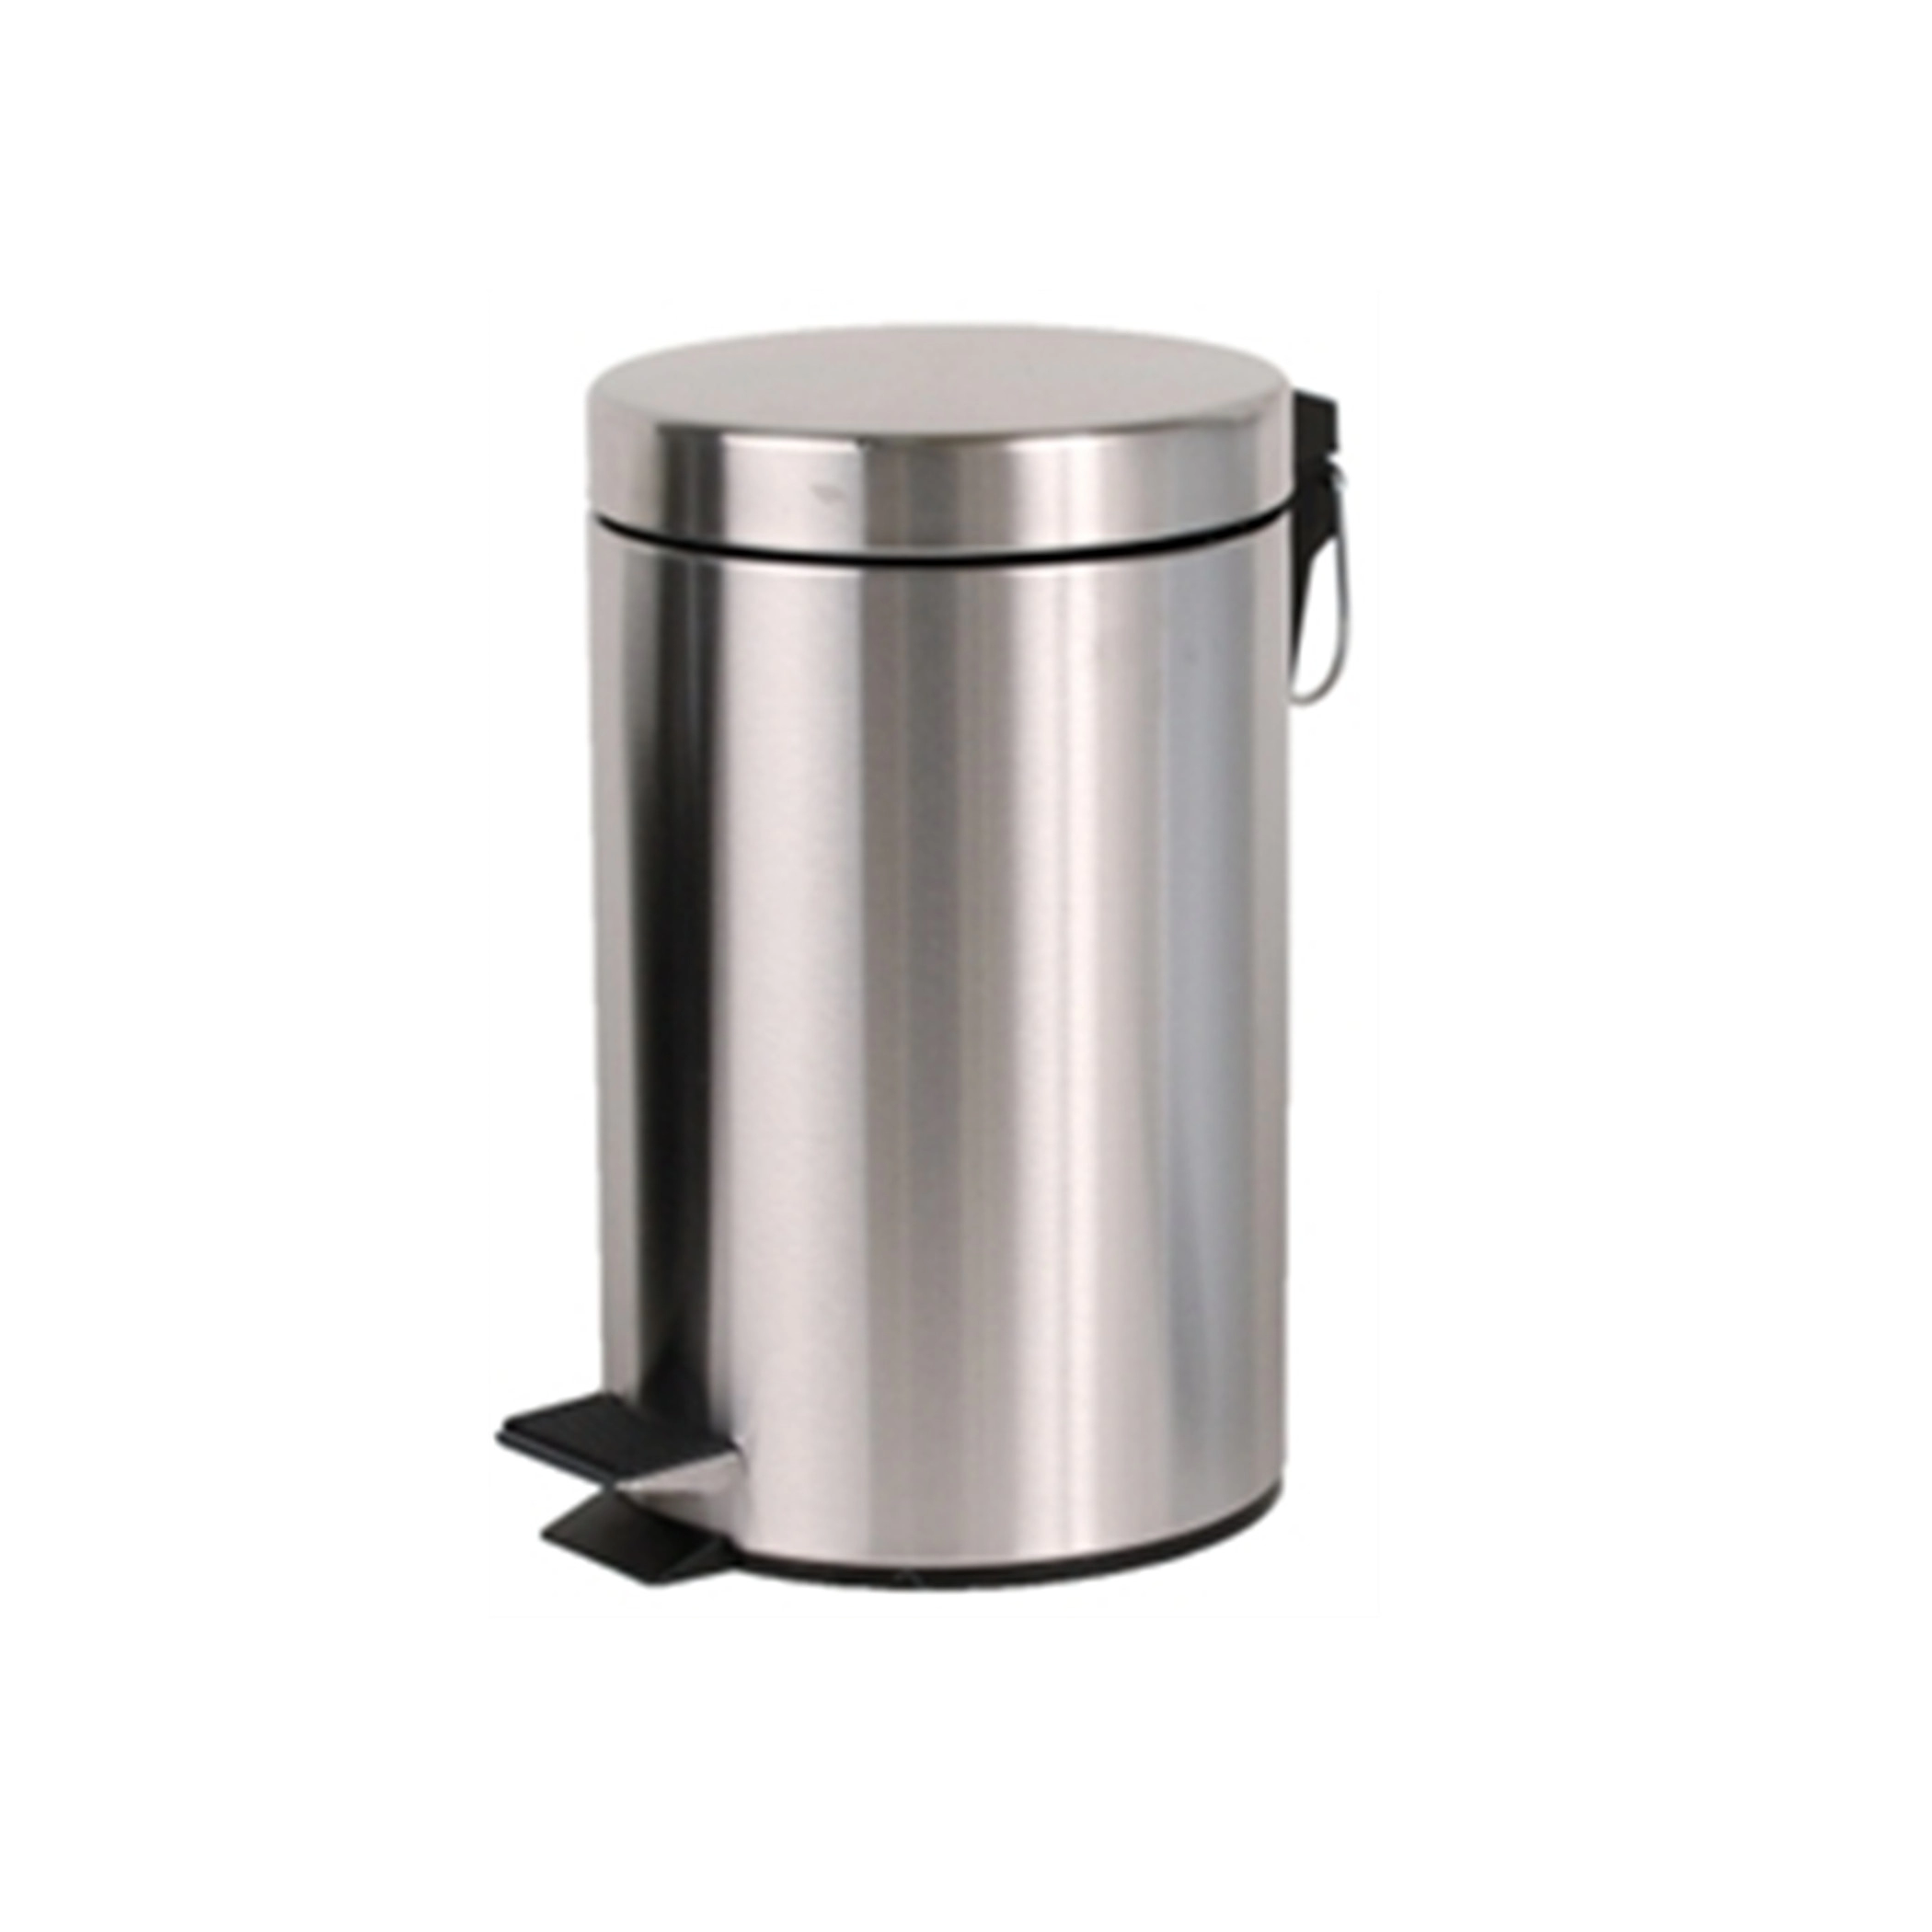 Stainless Steel Trash Bin With Pedal